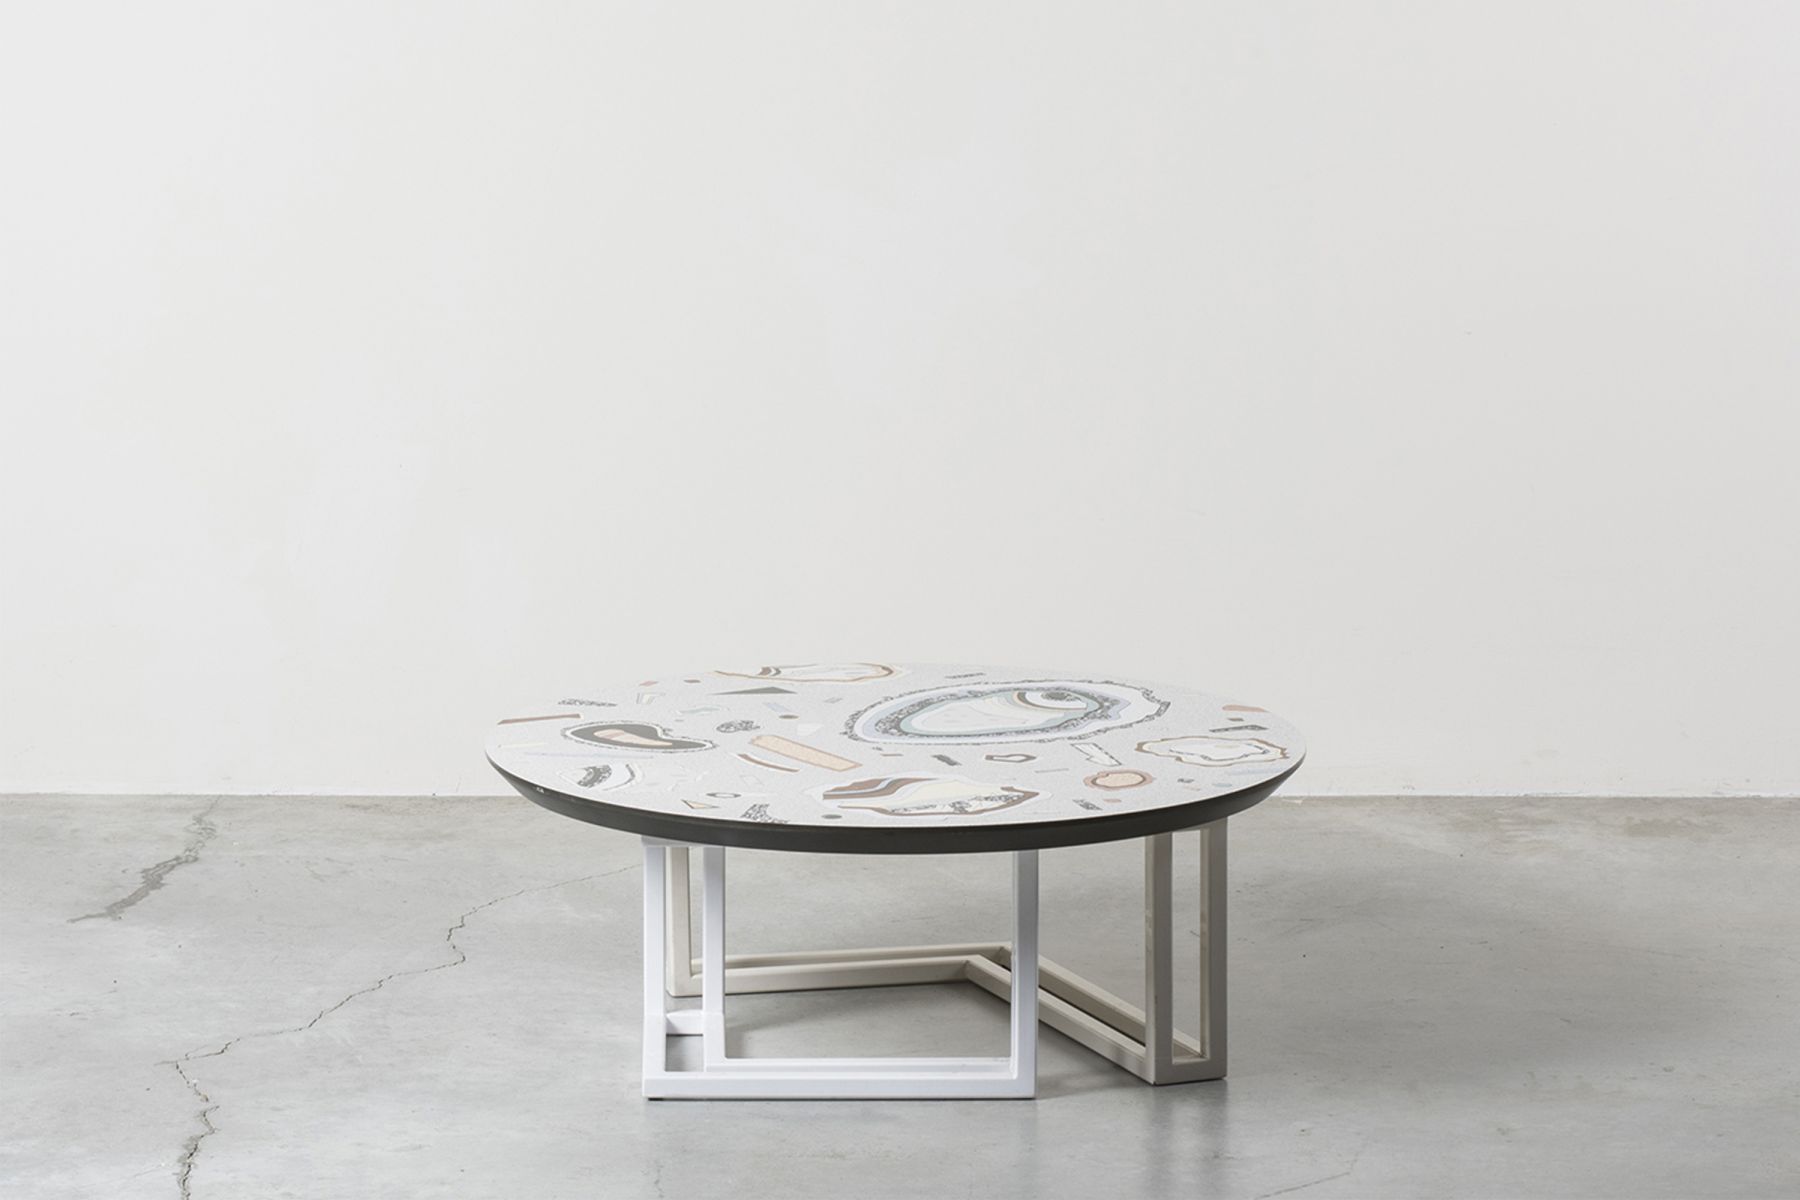 Low table 'Moon Rock G' Bethan Laura Wood pic-1